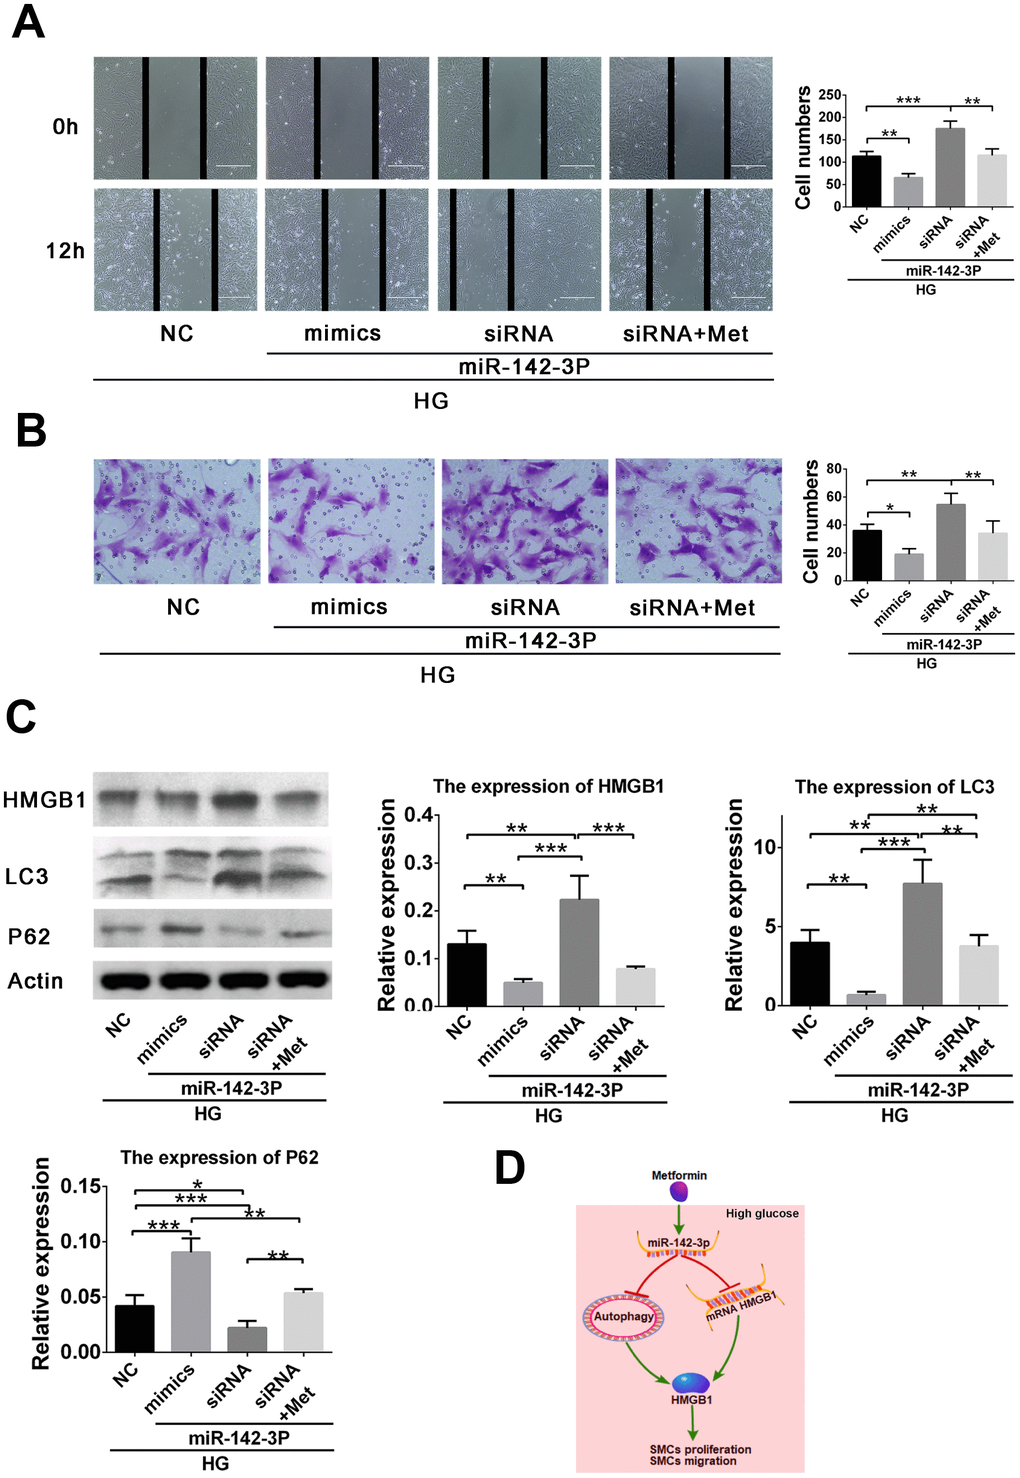 miR-142-3p overexpression by mimic and miR-142-3p inhibition by siRNA resulted in inhibition and promotion, respectively, of high glucose–induced vascular smooth muscle cell (VSMC) migration enhancement via the HMGB1-autophagy related pathway, whereas metformin abolished the effects of miR-142-3p siRNA. (A) Scratch assay for the effects of miR-142-3p overexpression and inhibition. (B) Transwell assay for the effects of miR-142-3p overexpression and inhibition. (C) miR-142-3p overexpression by mimic results in decreased HMGB1 and LC3II and elevated p62 level in high glucose–induced VSMC migration enhancement, whereas miR-142-3p siRNA caused the opposite effects and metformin abolished the effects of miR-142-3p siRNA. (D) Schematic of the role of metformin in the regulation of VSMC proliferation and migration. *p p p 